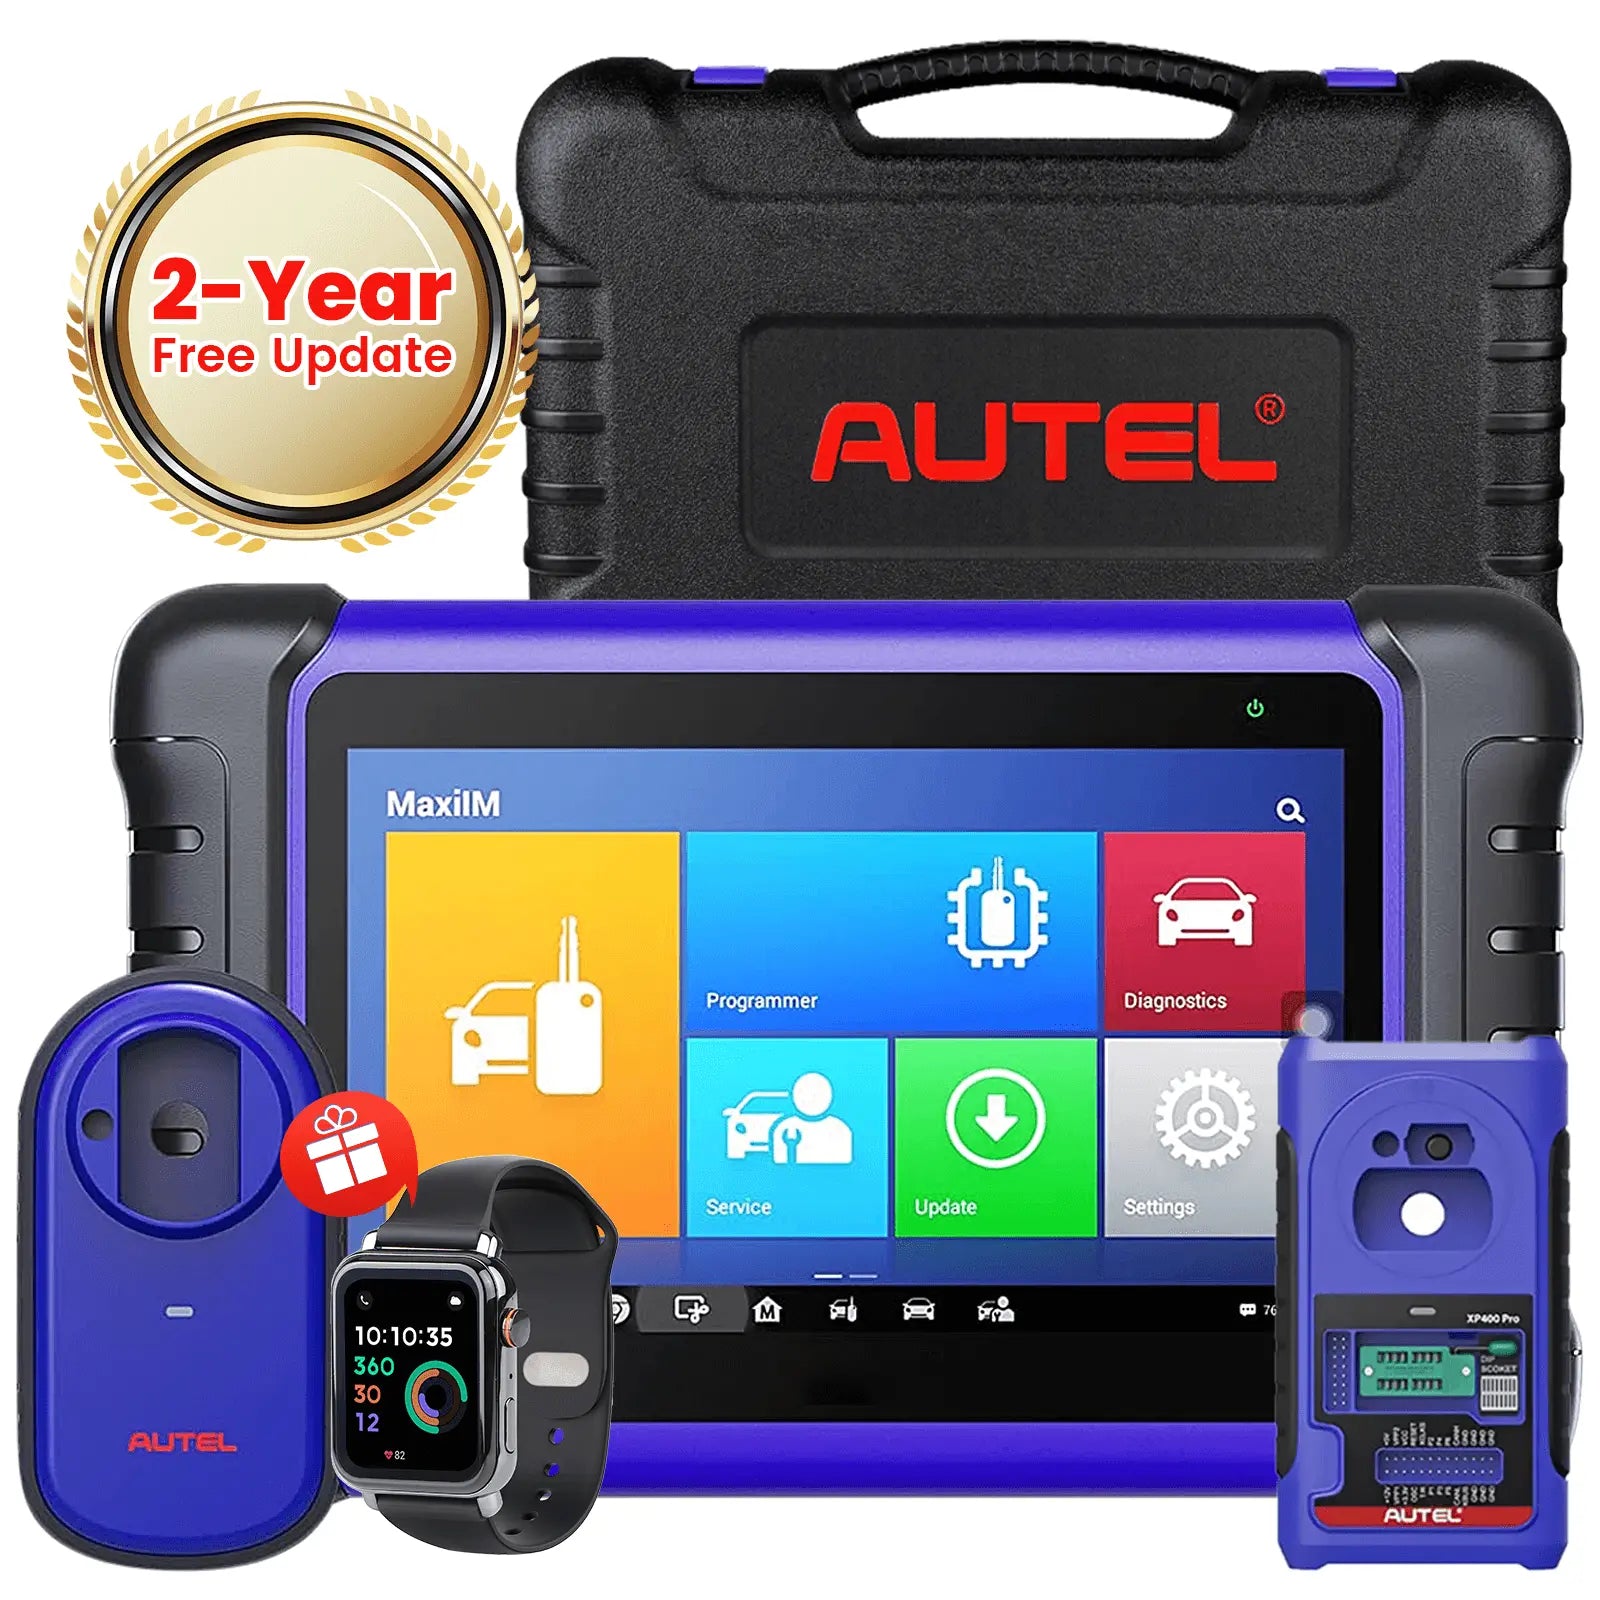 Autel IM508 Professional Key FOB Programming Tool with XP200 Programmer, Car Diagnostic Scan Tool with All System Diagnostics, ABS Bleed/ Oil Reset/ EPB/ DPF/ SAS/ BMS for Workshops/ DIYERS